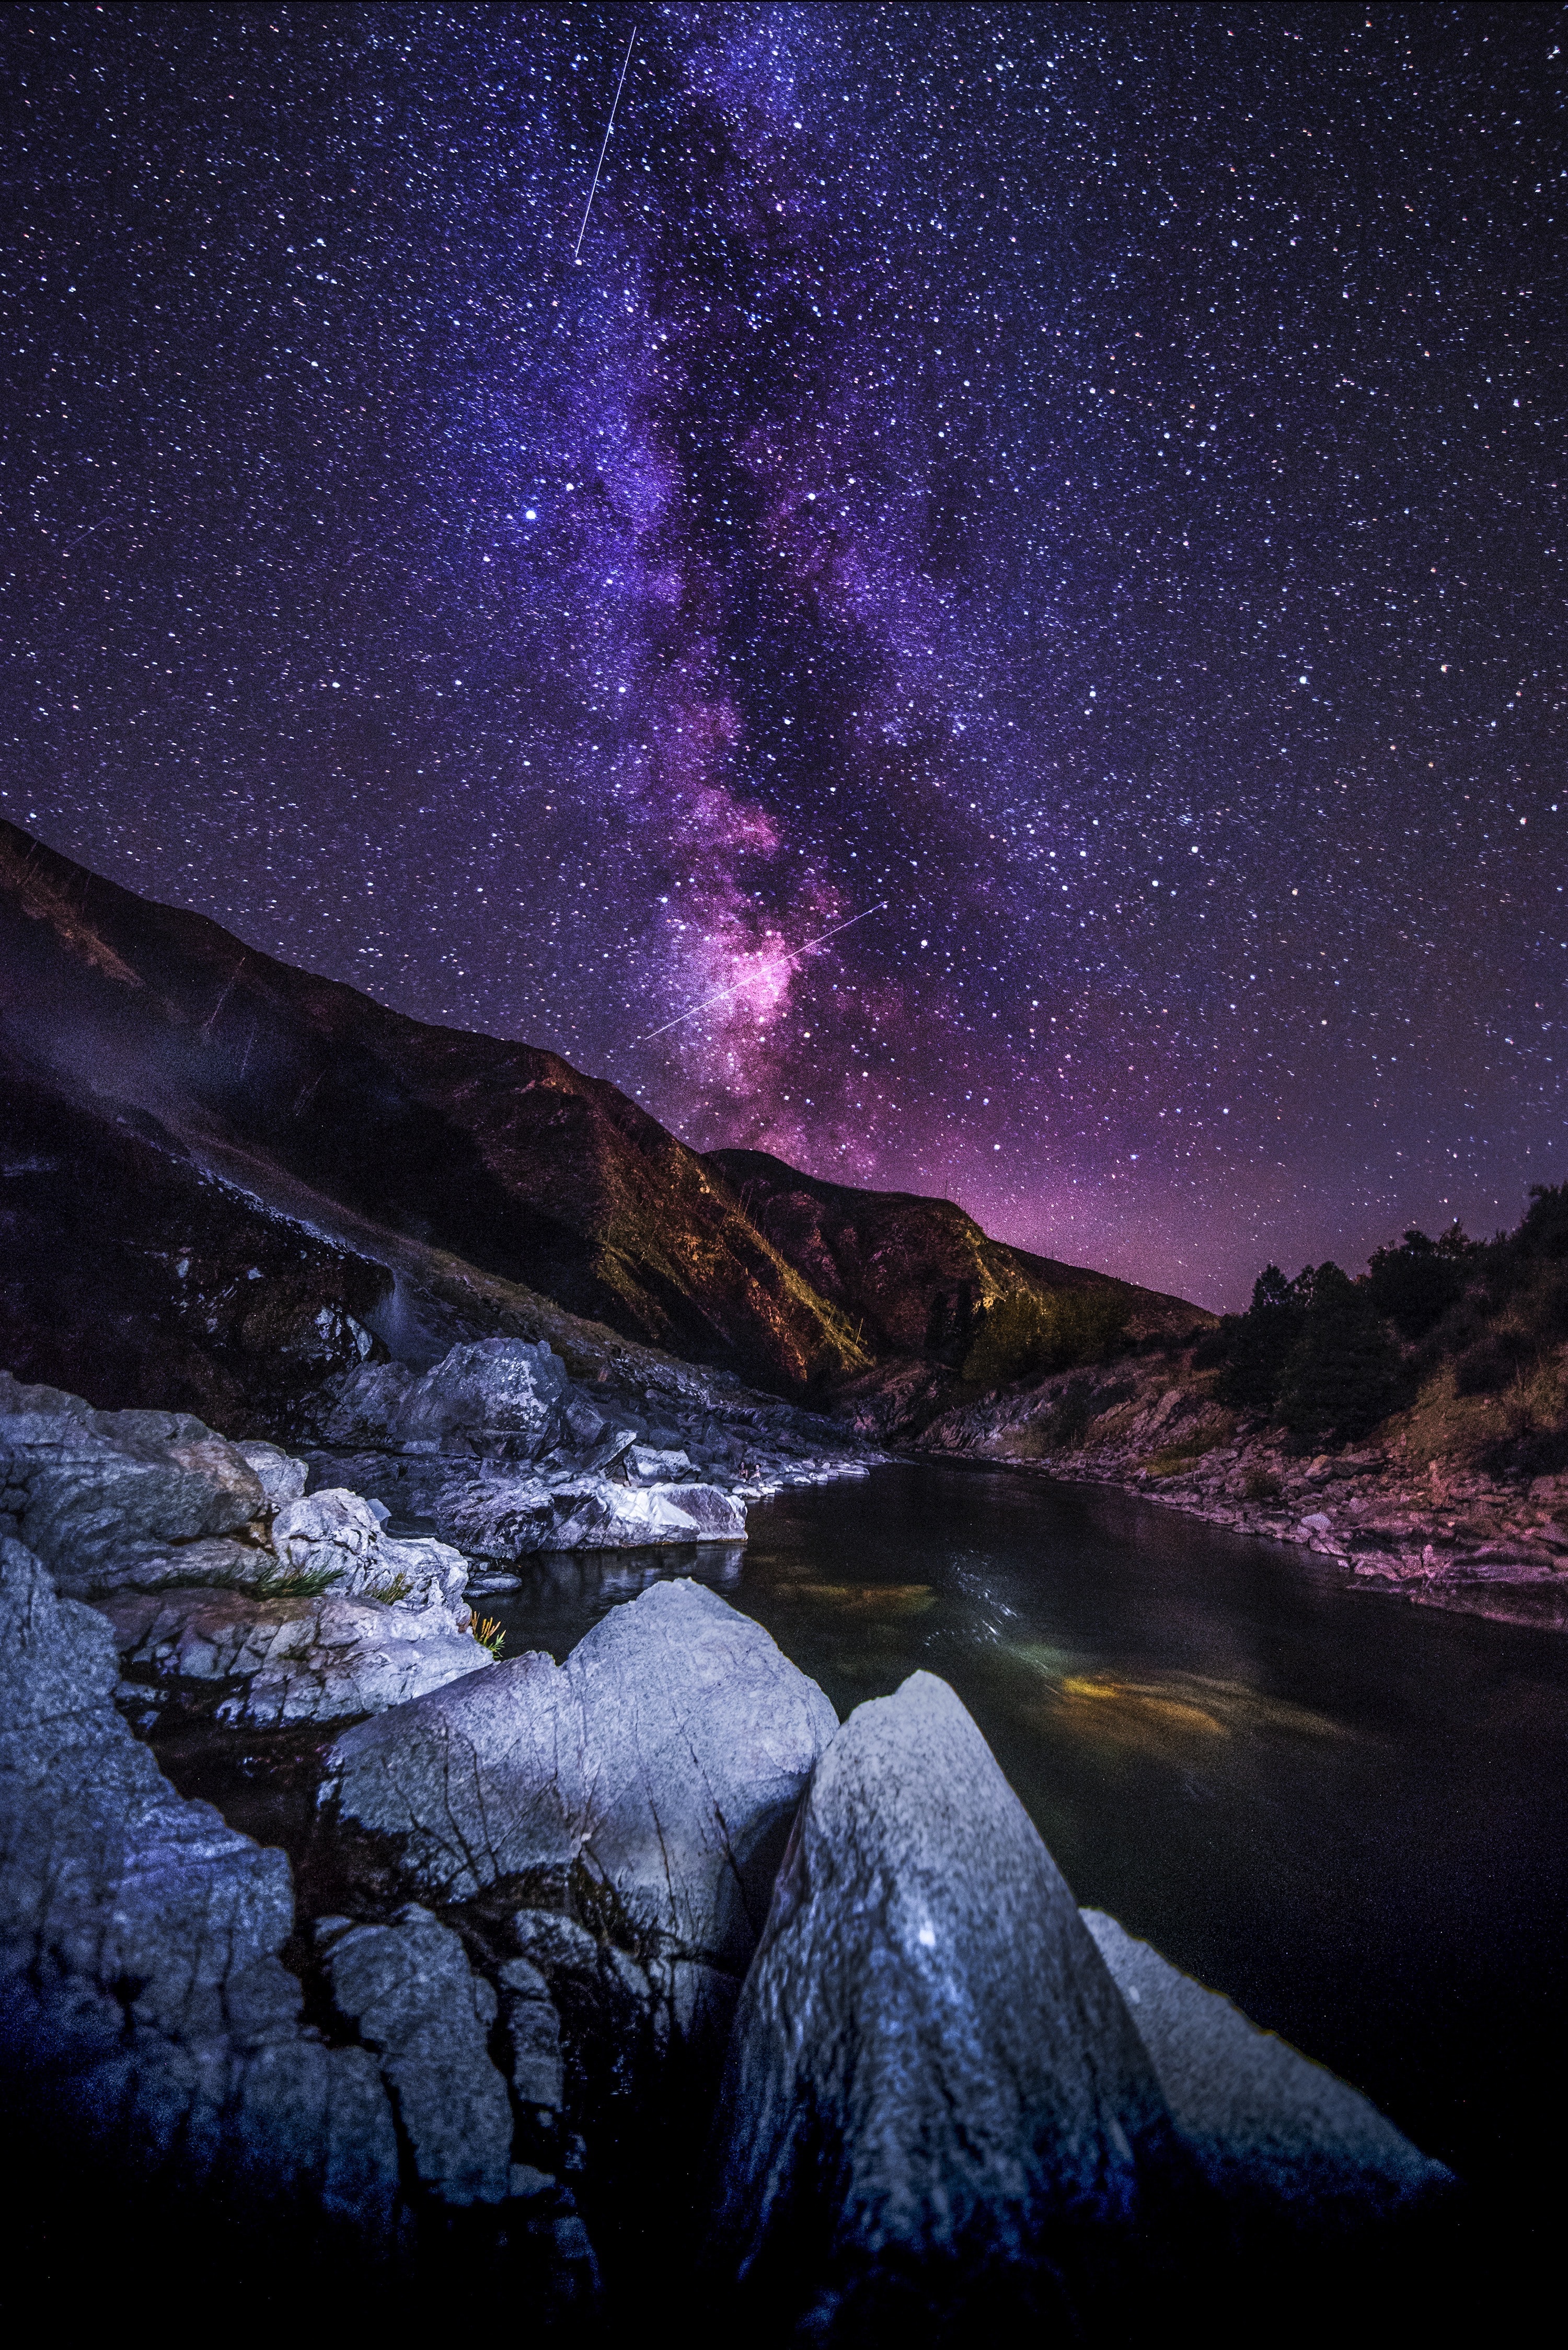 starry sky, rivers, nature, landscape, mountains, night 2160p